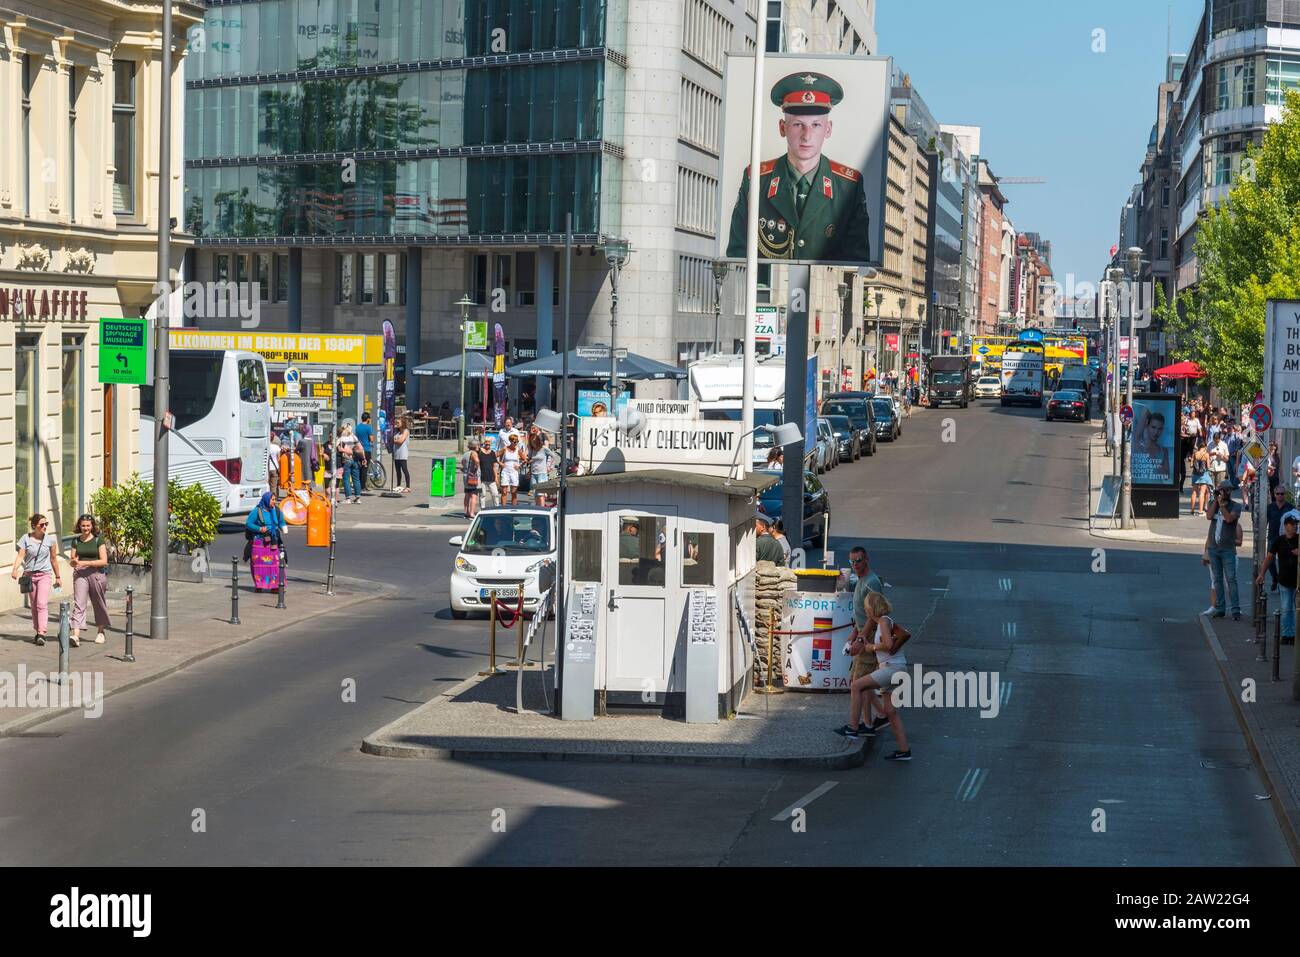 BERLIN, GERMANY - MAY 25, 2018: Tourists at the popular Checkpoint Charlie in Berlin, a reproduction of the historic crossing point between East Berli Stock Photo